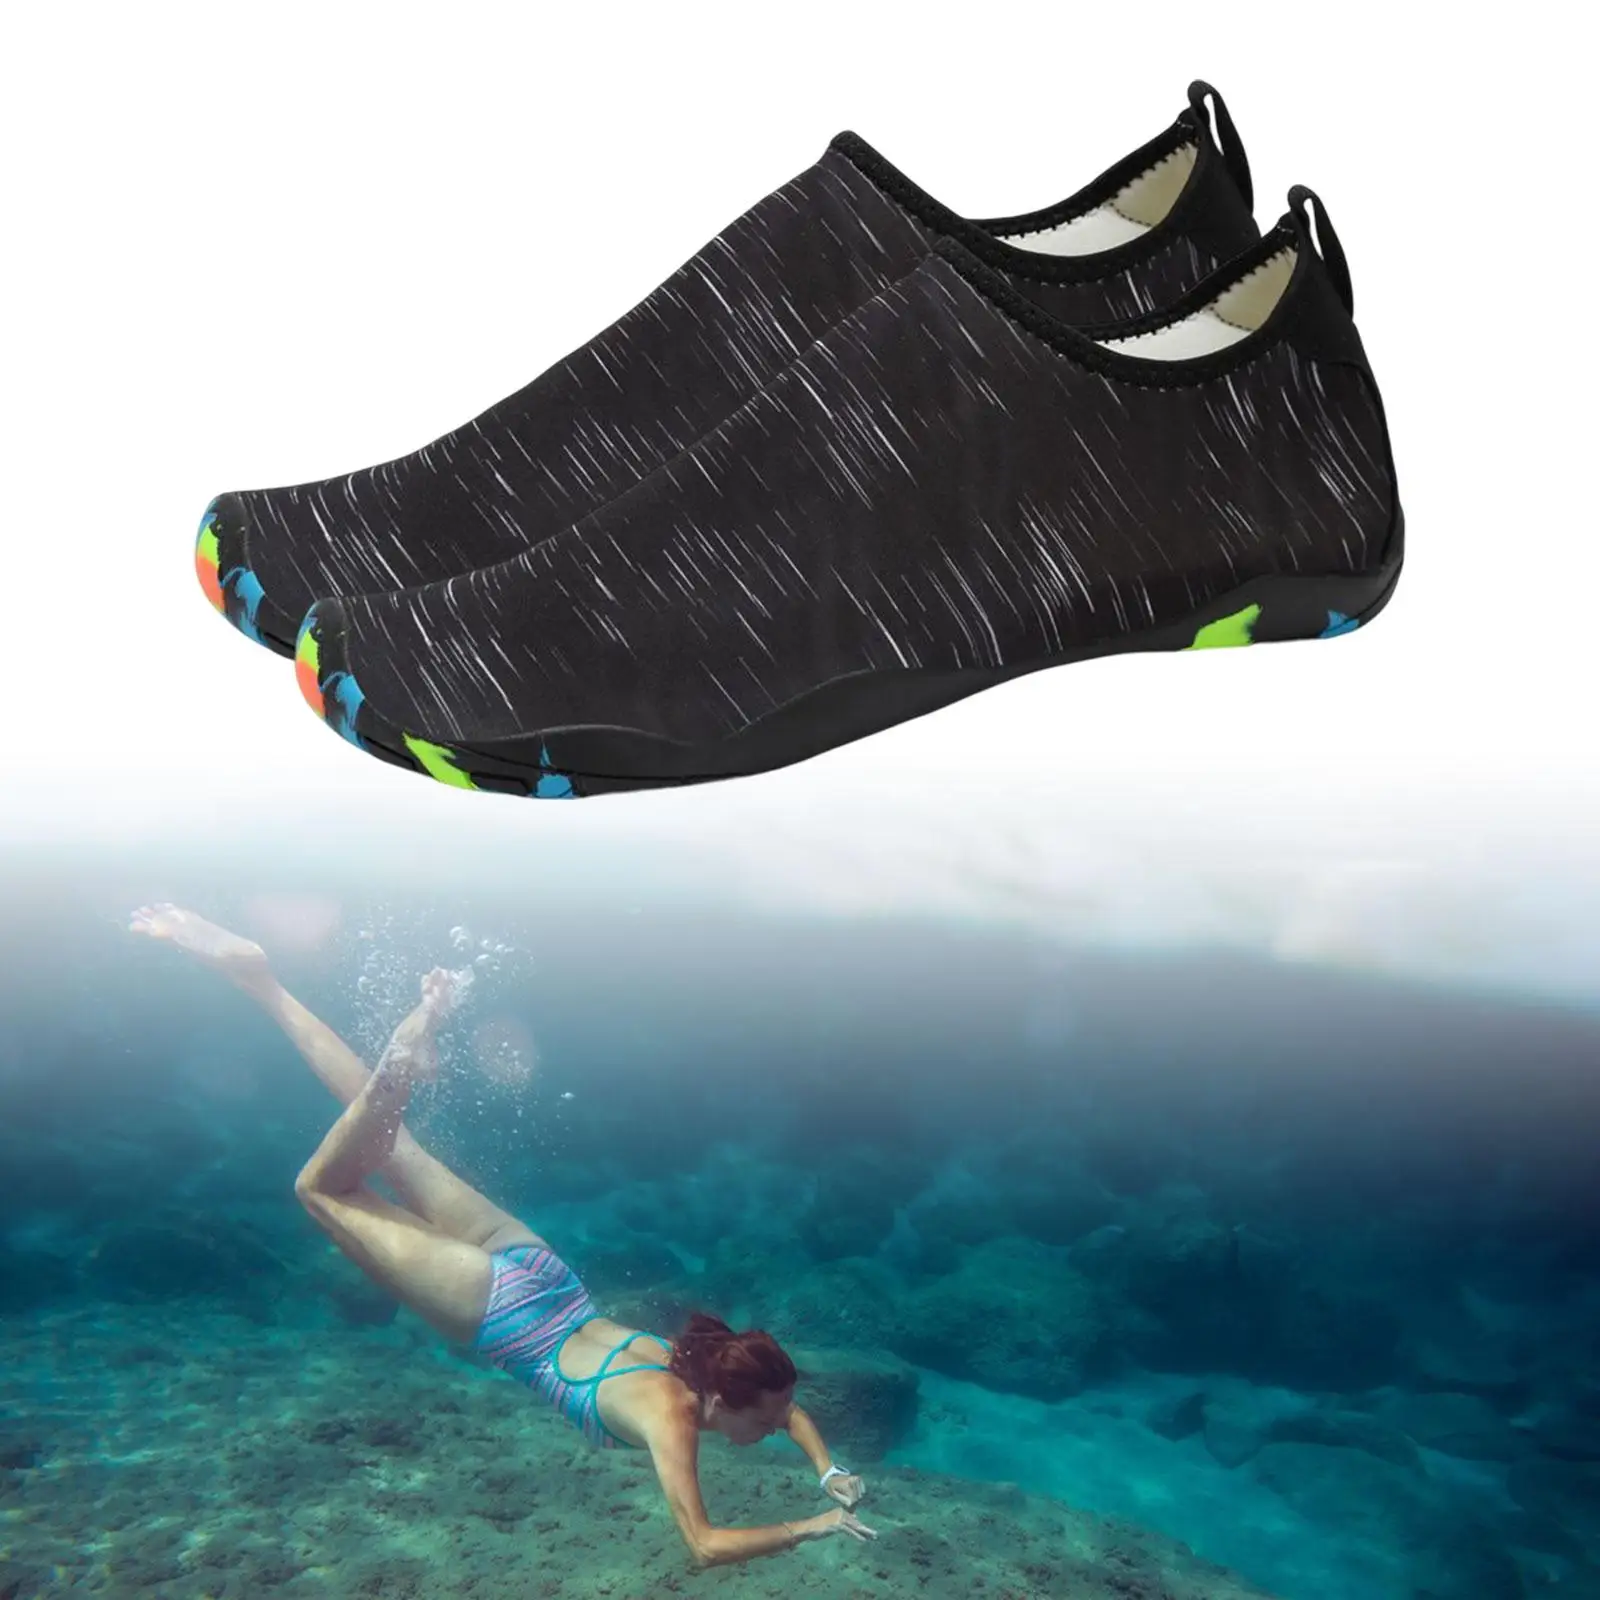 Men Women Water Shoes Barefoot Sock Slip on Shoes for Beach Surfing